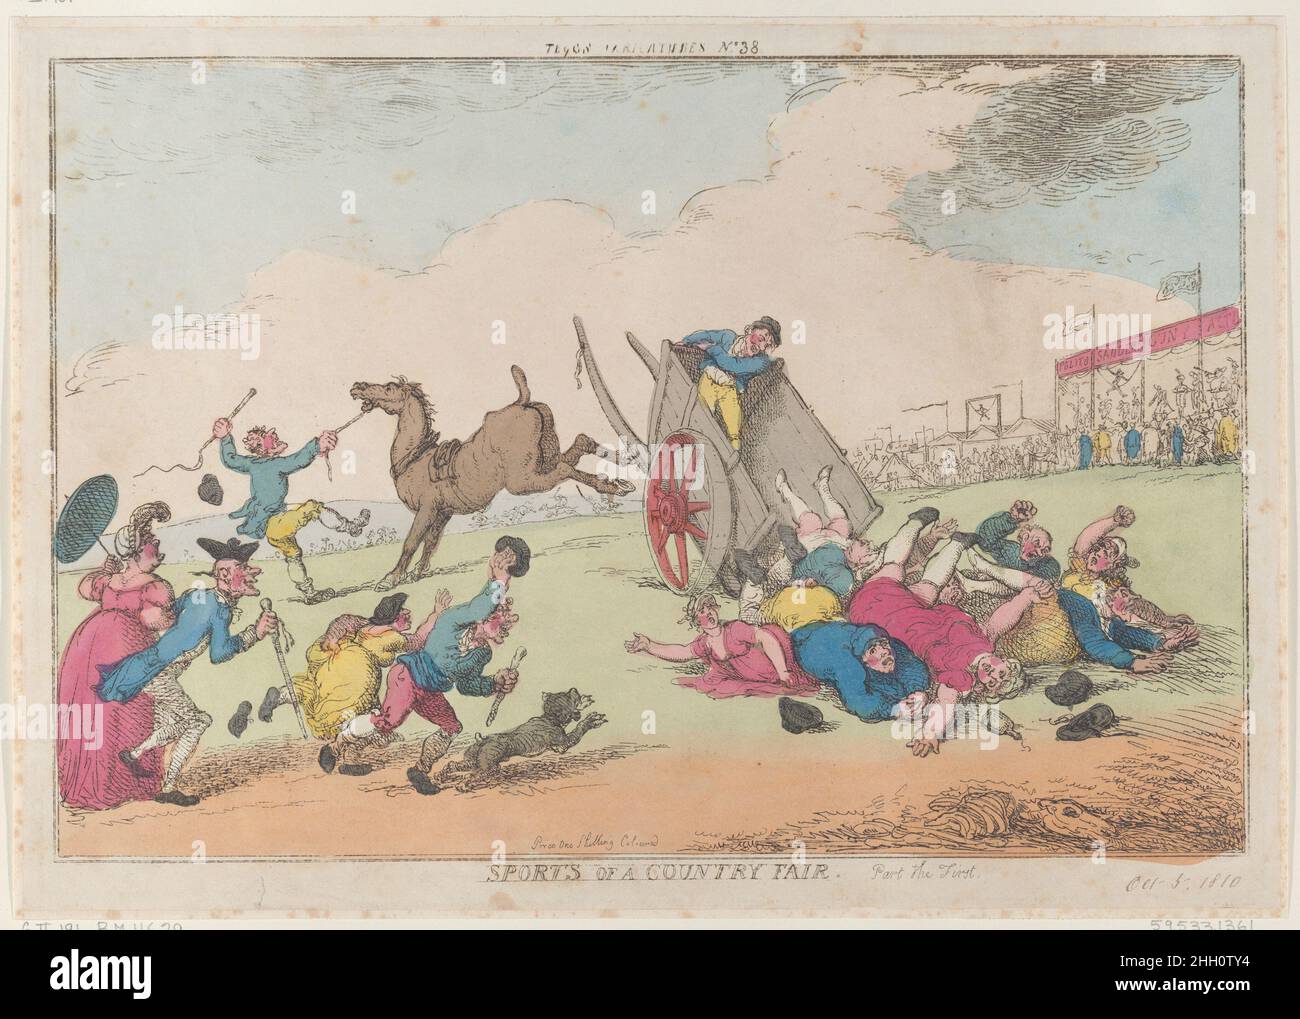 Sports of a Country Fair, Part the First October 5, 1810 Thomas Rowlandson A horse has broken loose from a two-wheeled cart, which is packed with visitors to the fair, who have been thrown onto the ground. The fair booths are in the background at right.. Sports of a Country Fair, Part the First. Thomas Rowlandson (British, London 1757–1827 London). October 5, 1810. Etching. Thomas Tegg (British, 1776–1846). Prints Stock Photo